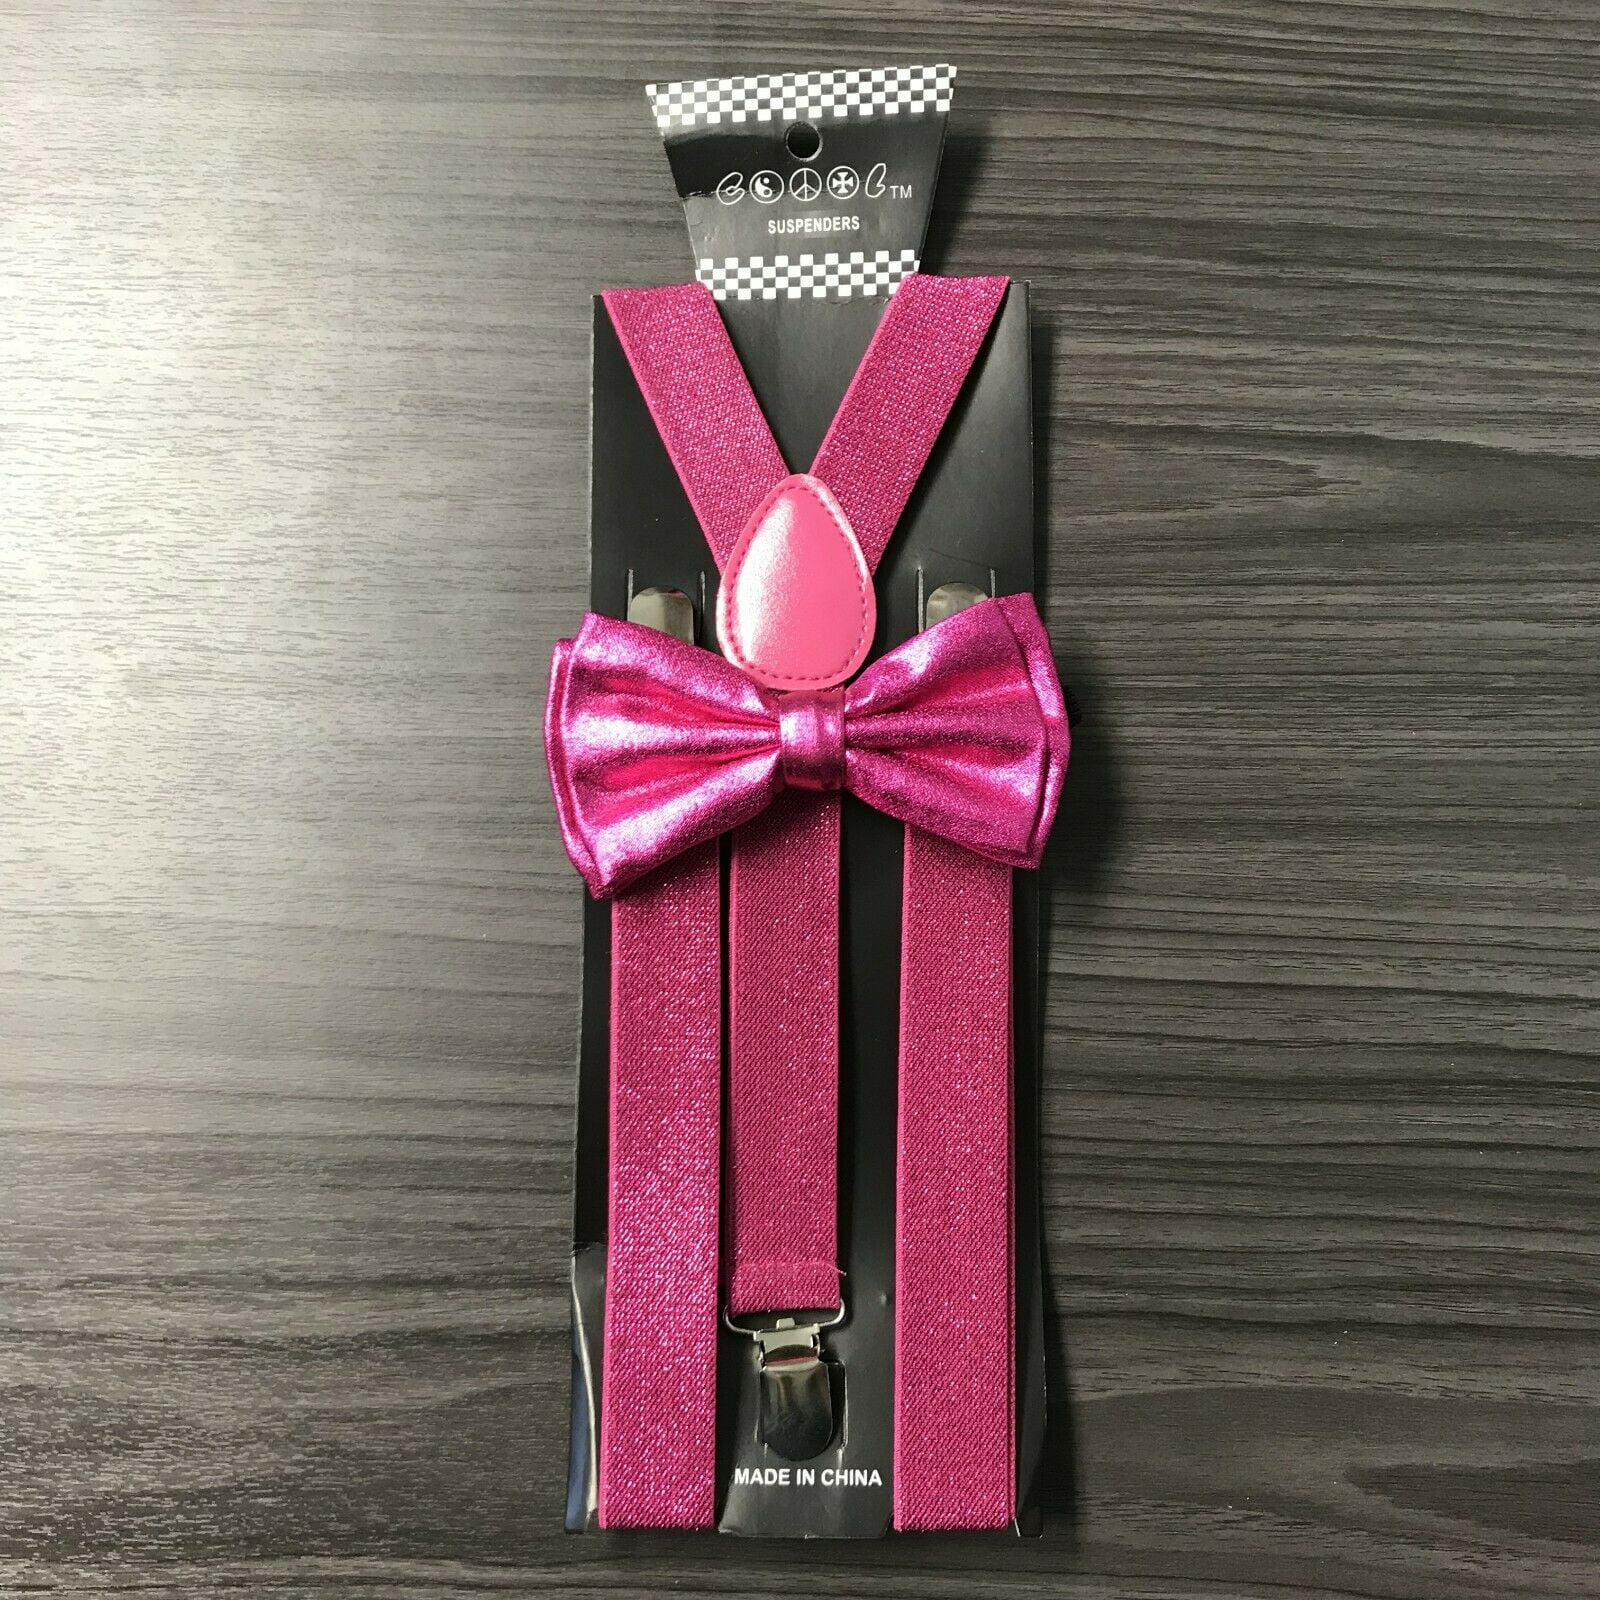 Pink Glitter Suspenders and Bow Tie Matching Set Wedding Tuxedo Prom Adult 